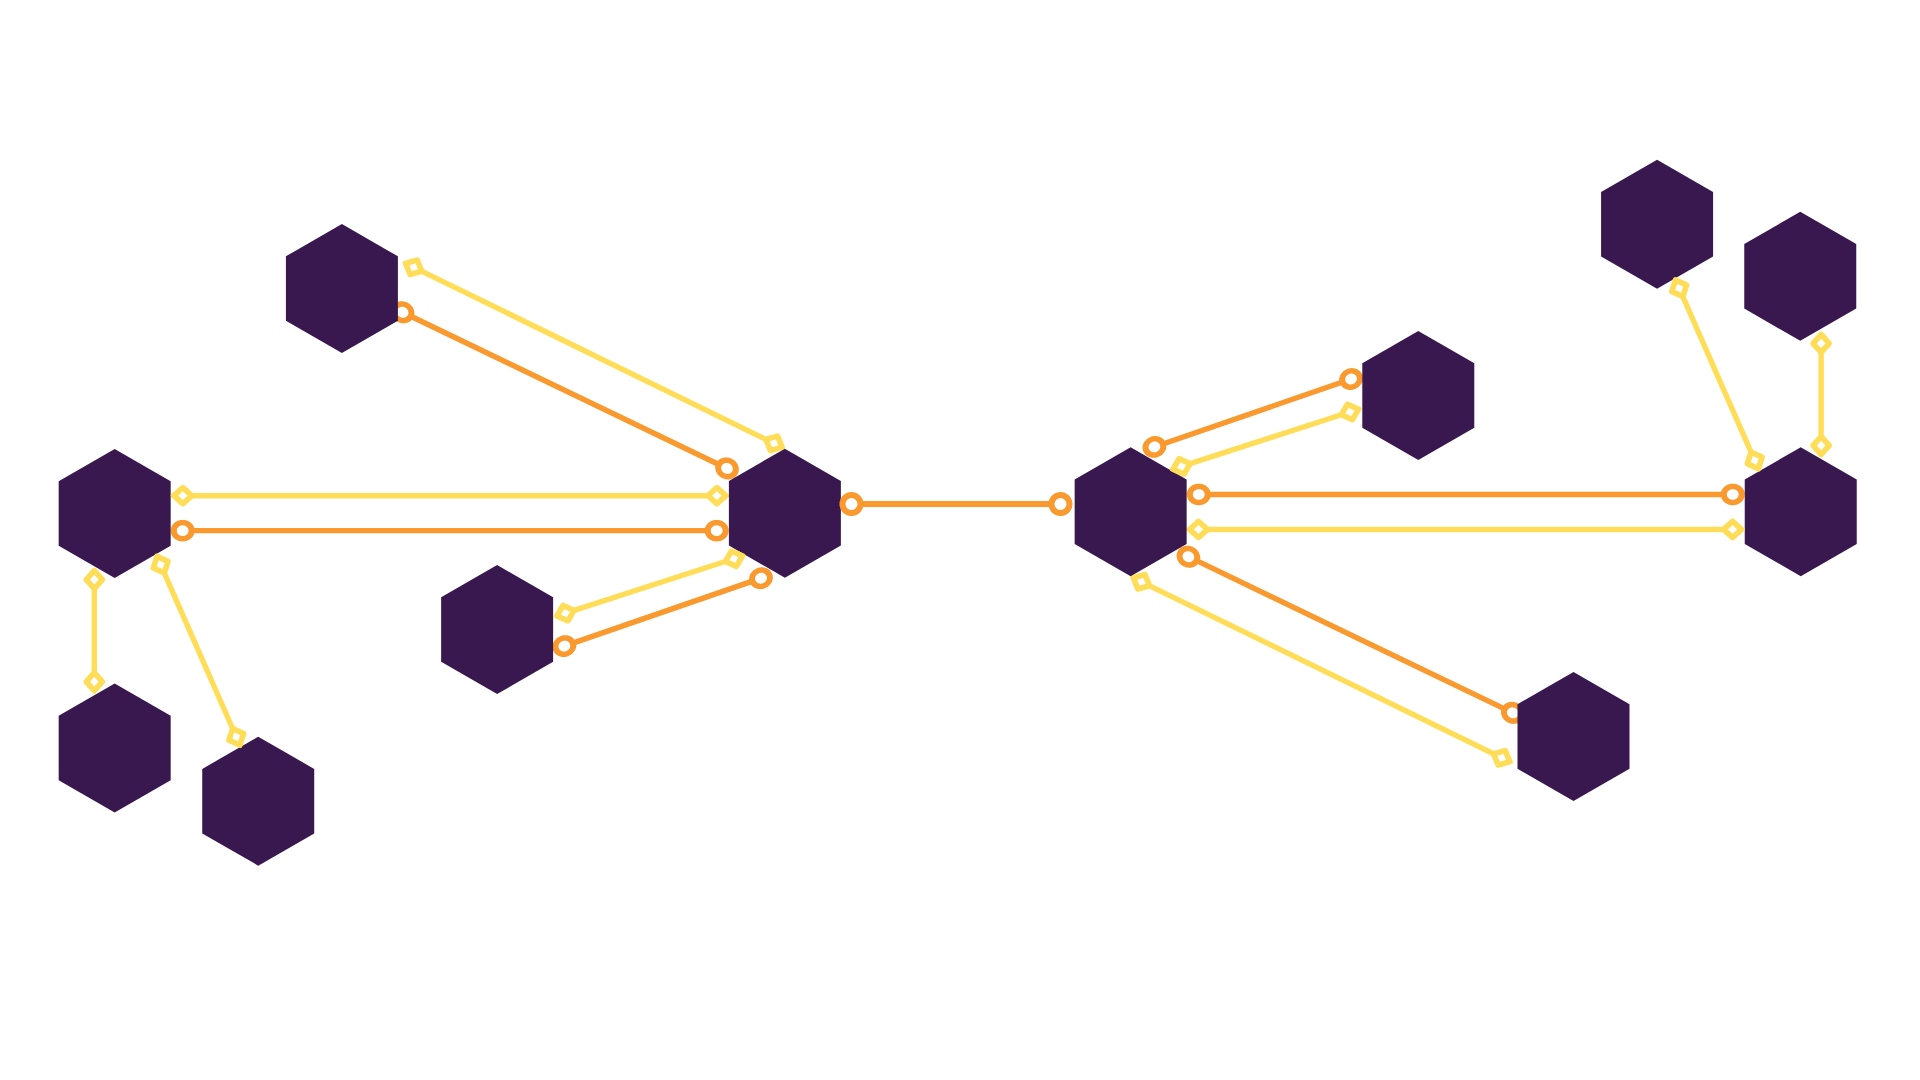 Two HiFis connected into a single Plex